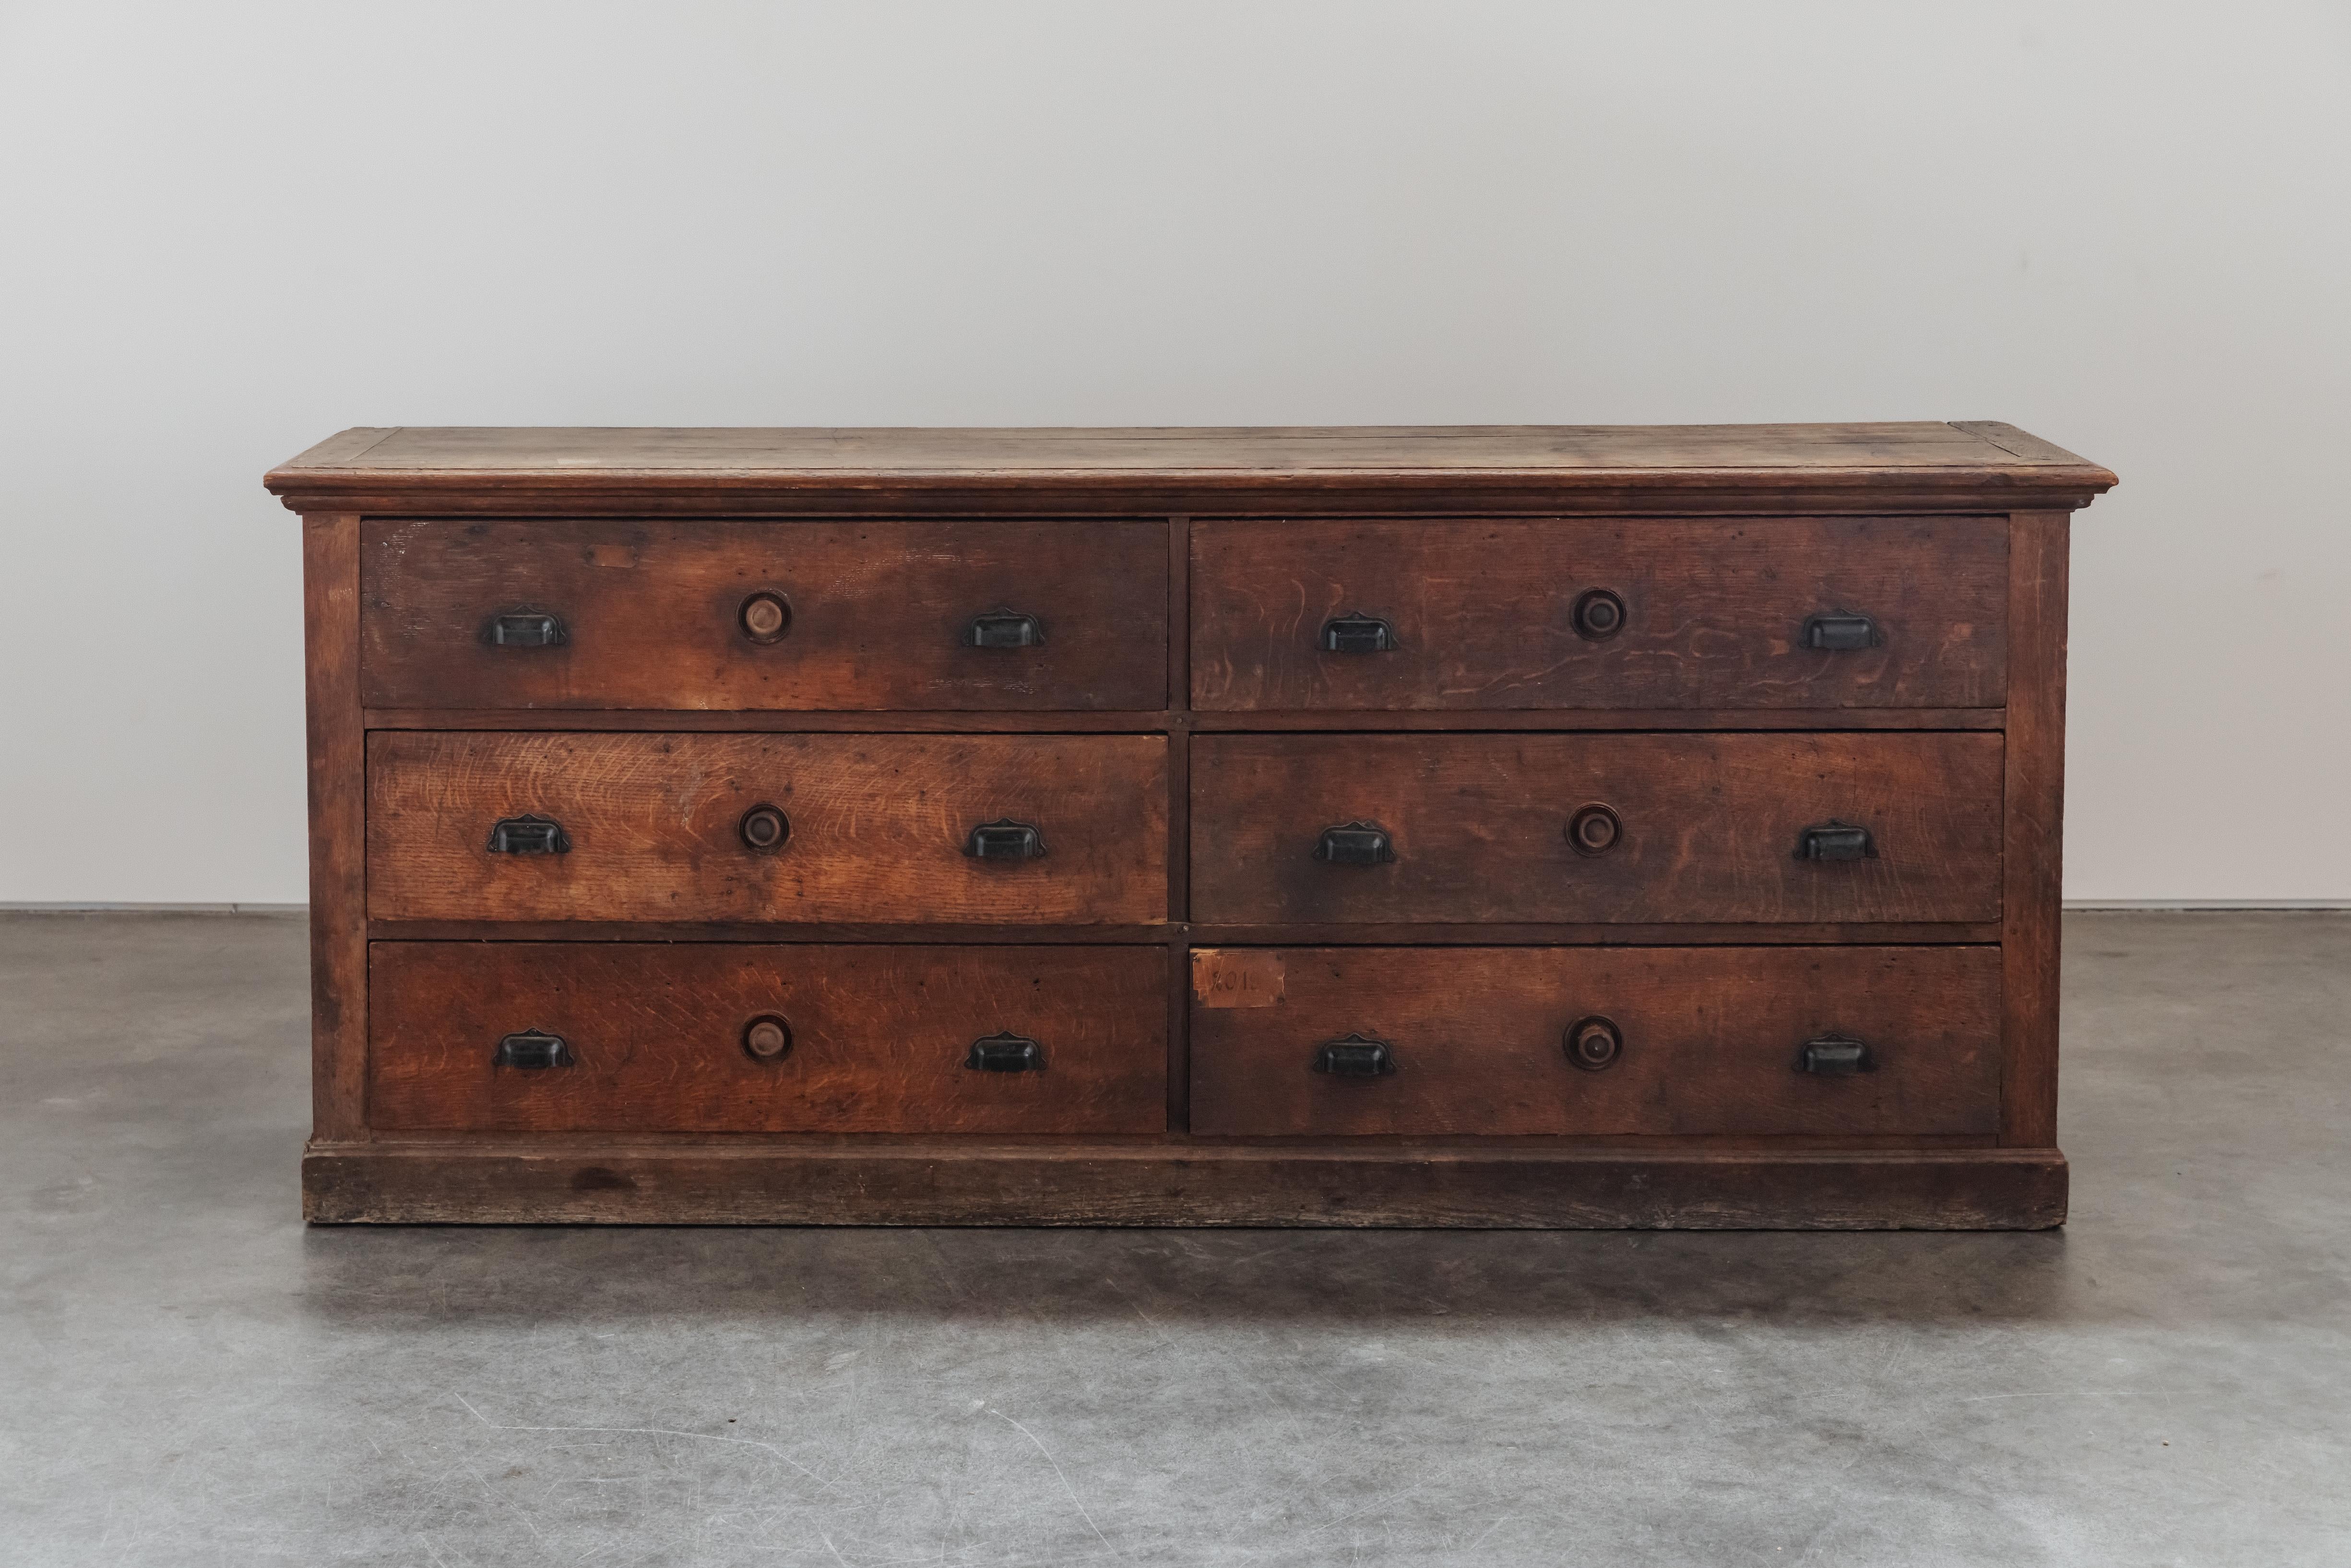 Early Oak Shop Commode From France, Circa 1900.  Solid oak construction with original hardware.  Great patina.